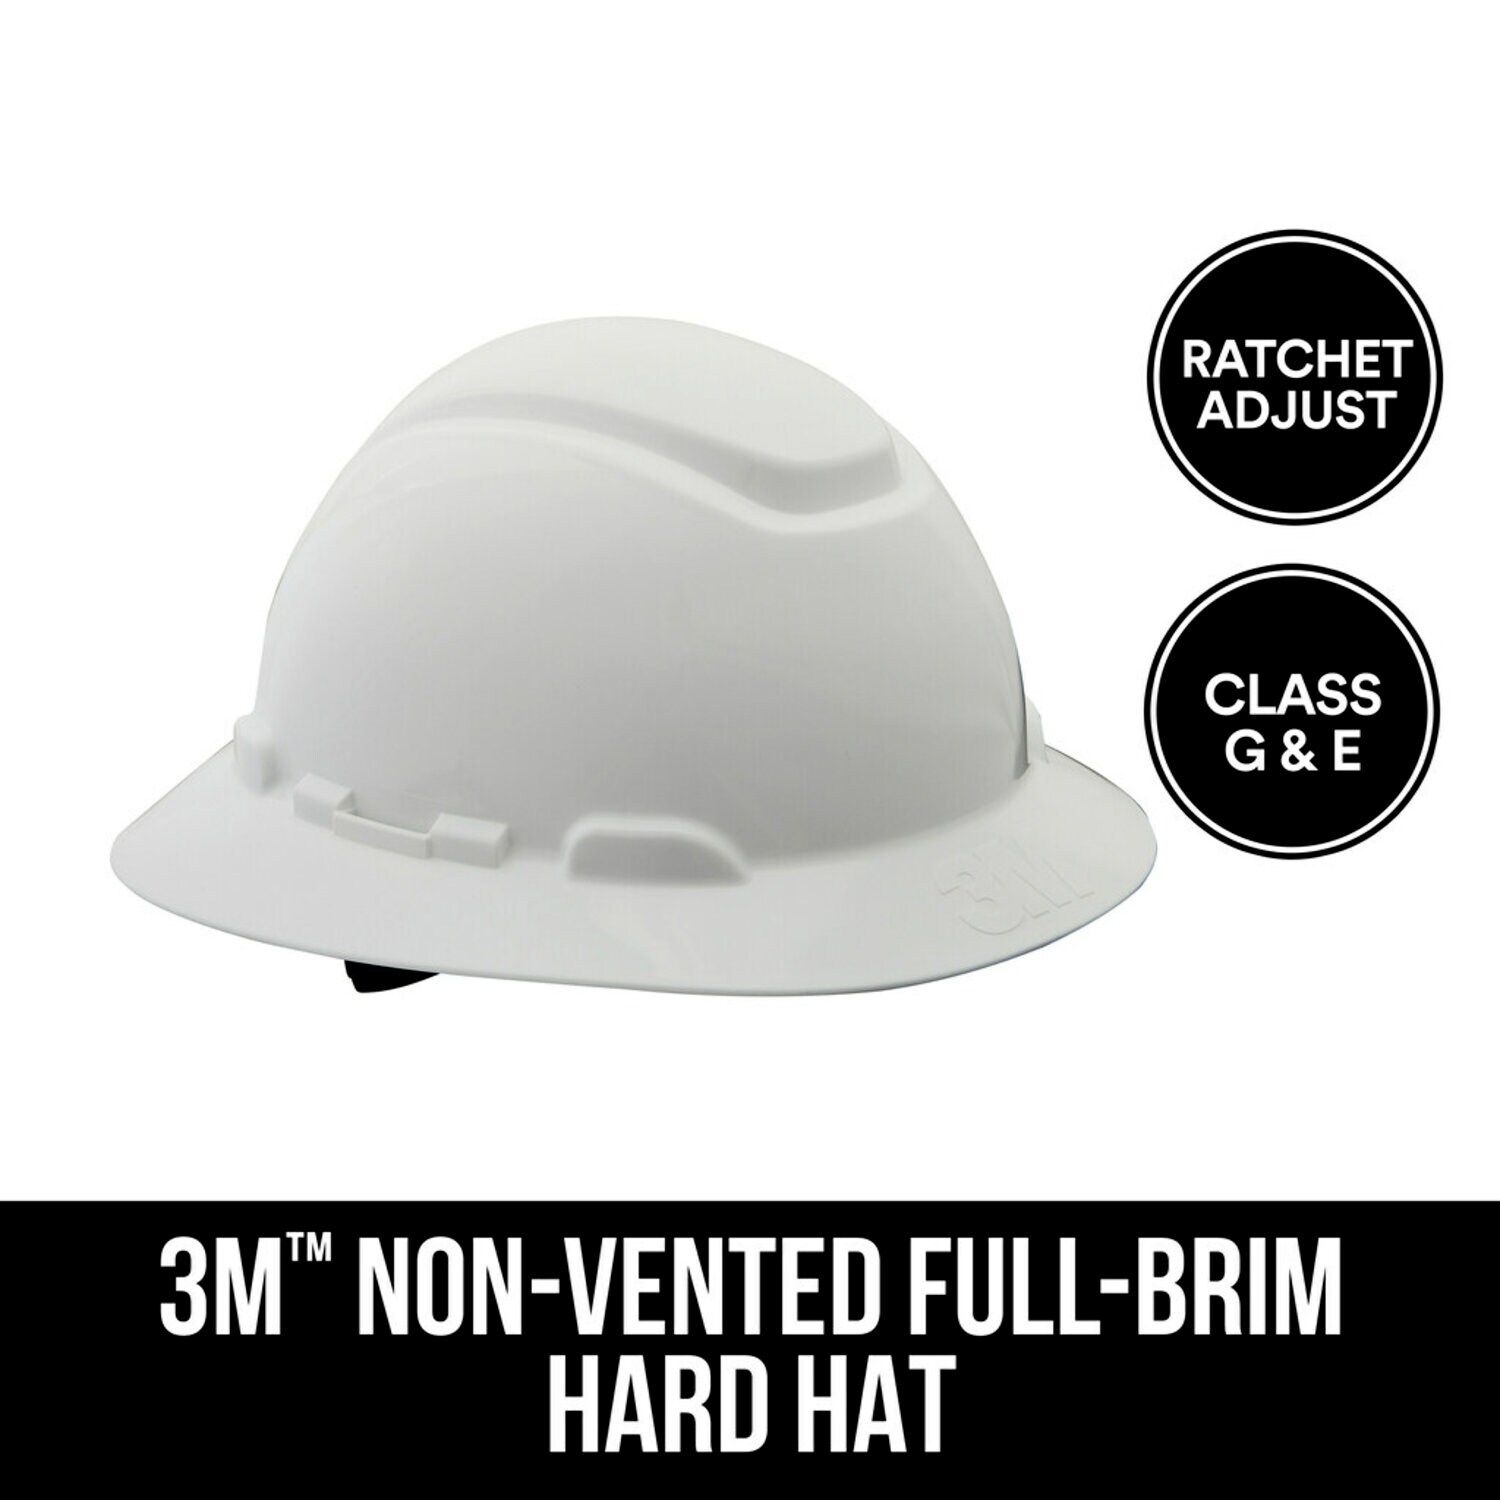 7100119484 - 3M Full-Brim Non-Vented Hard Hat with Ratchet Adjustment,
CHH-FB-R-W6-PS, 6/case